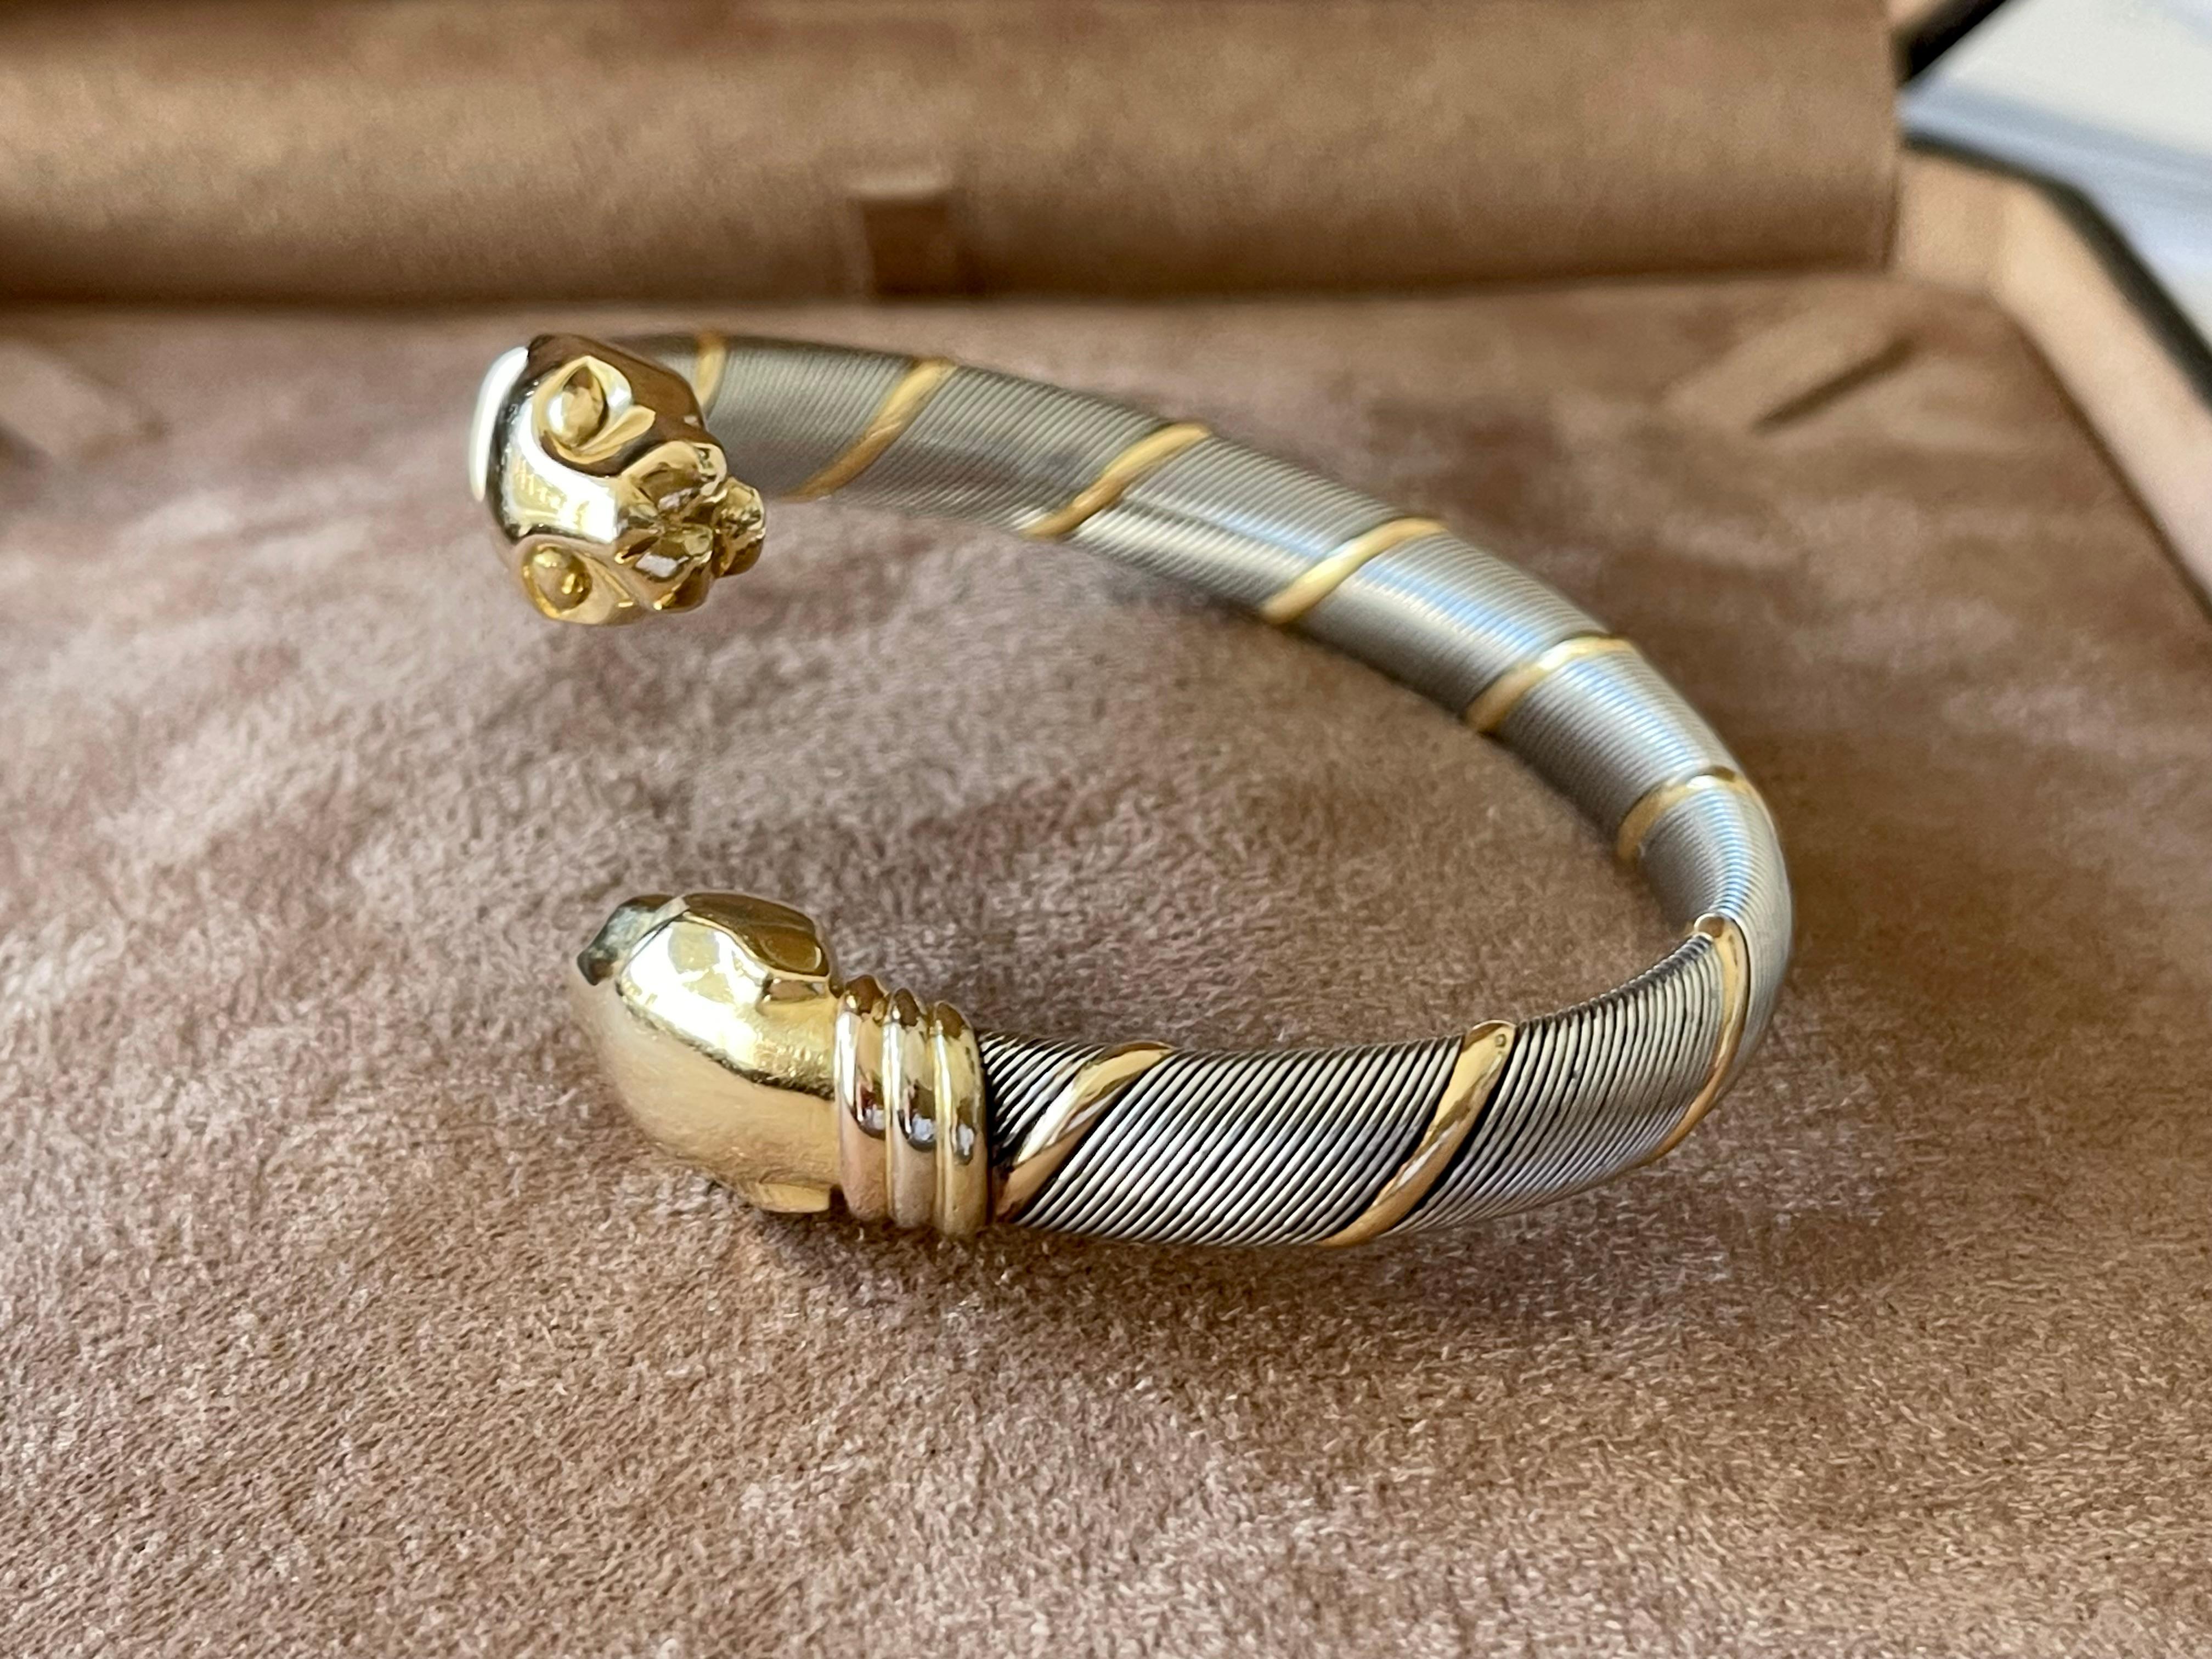 A beautiful vintage 1980’s Panthère de Cartier bangle set in stainless steel and 18 K yellow white and rose Gold.
This incredibly stylish bangle is composed of two solid yellow gold panther heads. These heads are connected to a coiled stainless